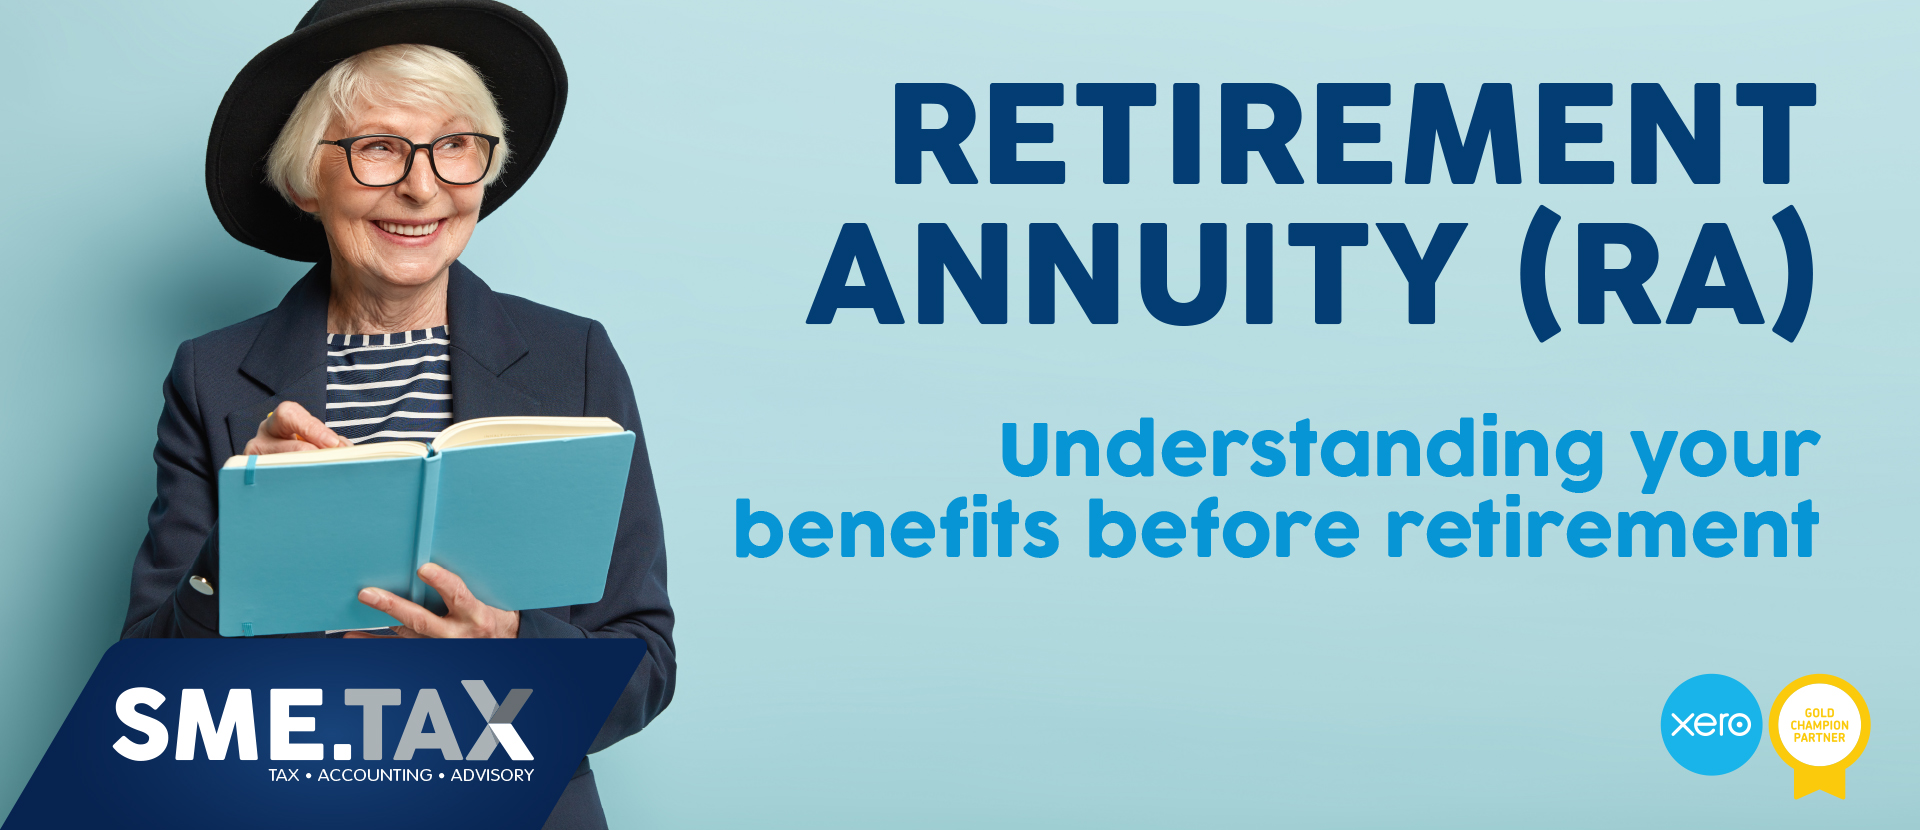 SME.TAX Retirement Annuity